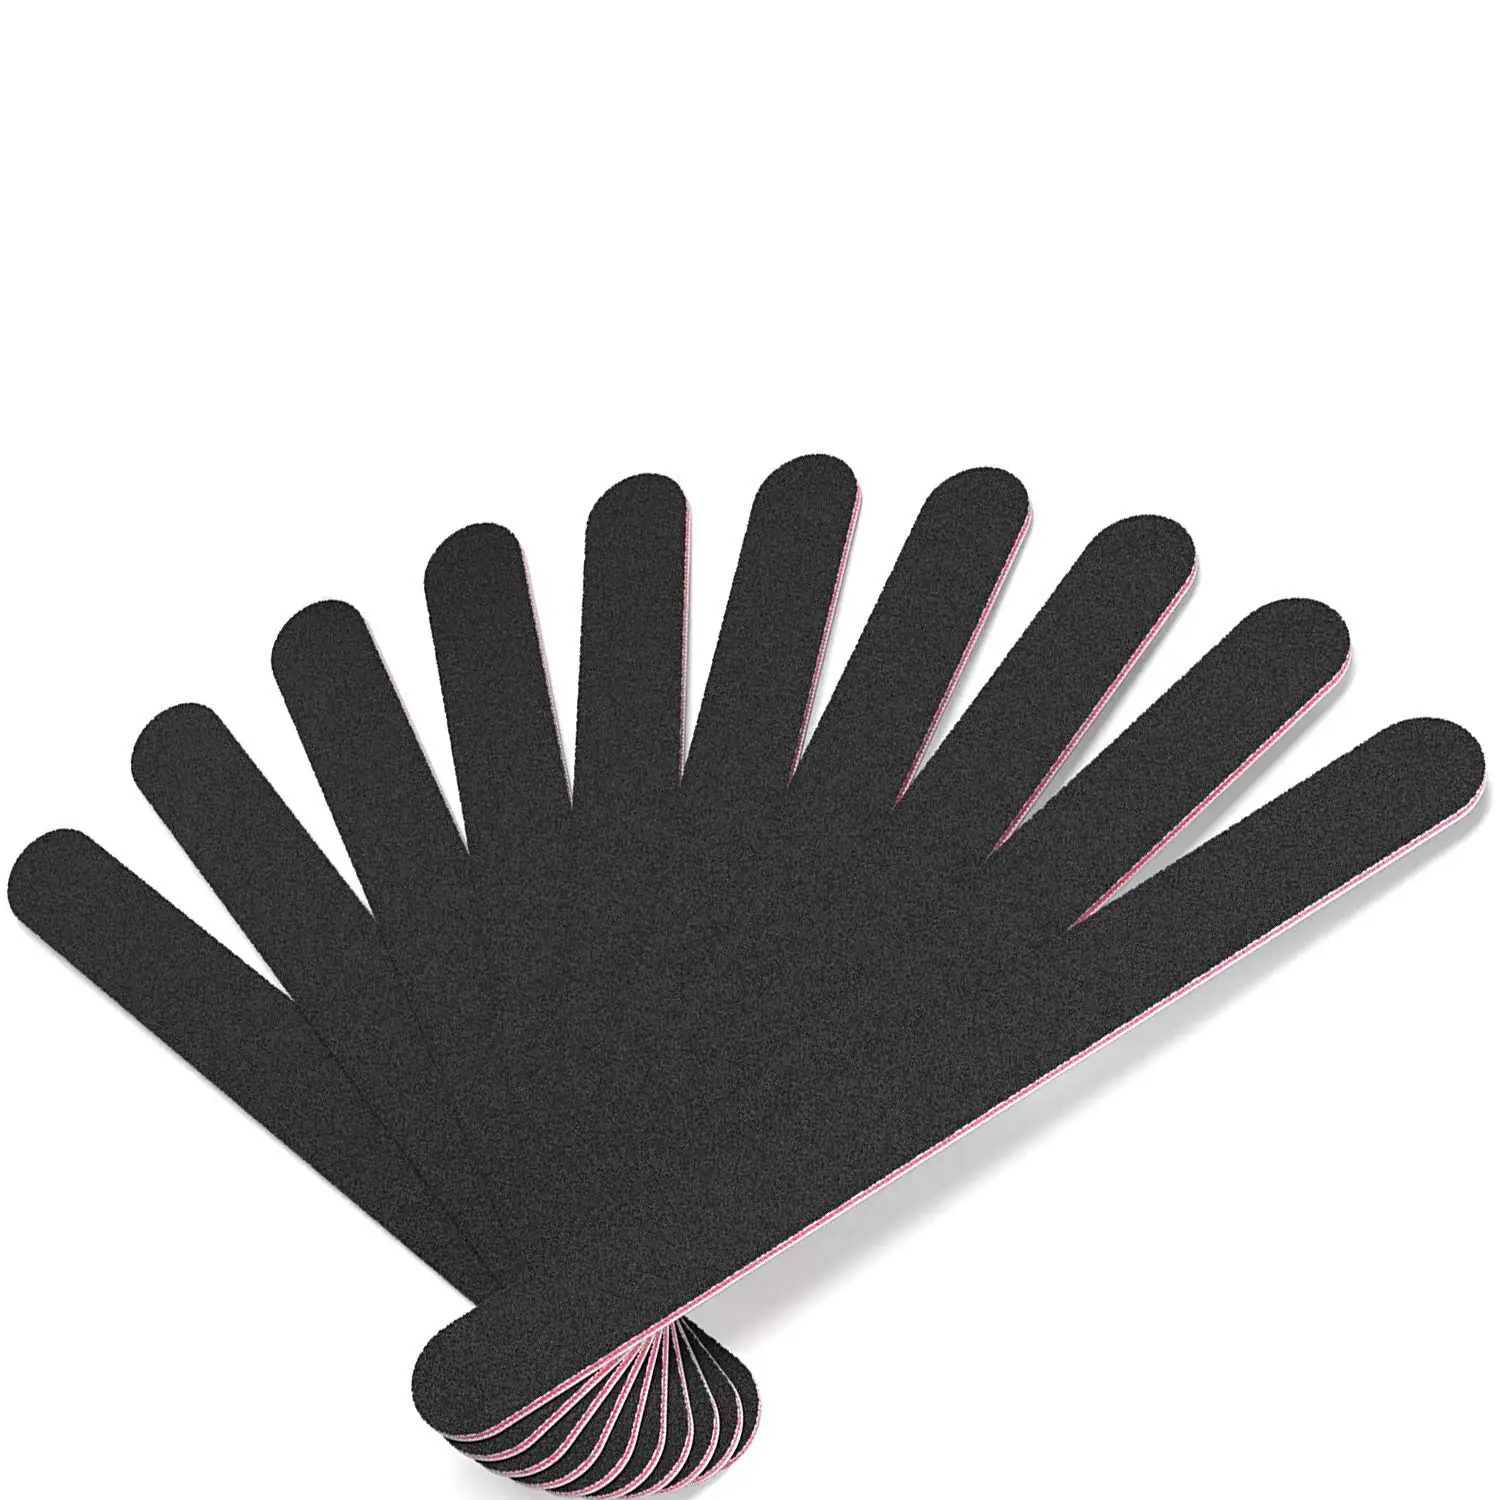 

Nail File 10 PCS Professional Double Sided 100/180 Grit Nail Files Emery Board Black Manicure Pedicure Tool